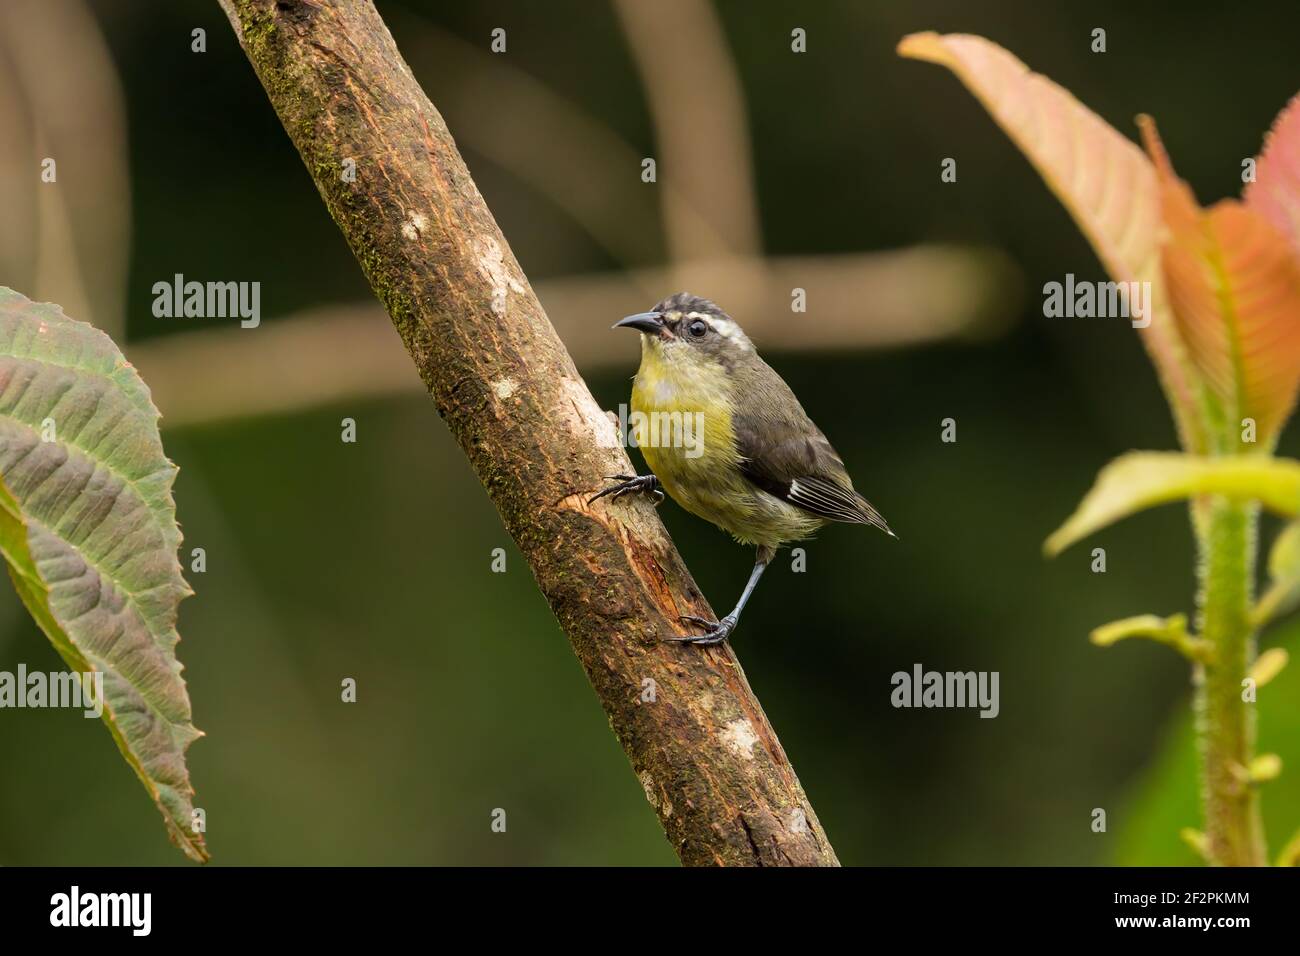 The Bananaquit, Coereba flaveola, is a small, tropical passerine bird that feeds on nectar.  Unlike the hummingbird, however, it cannot hover.  Shown Stock Photo